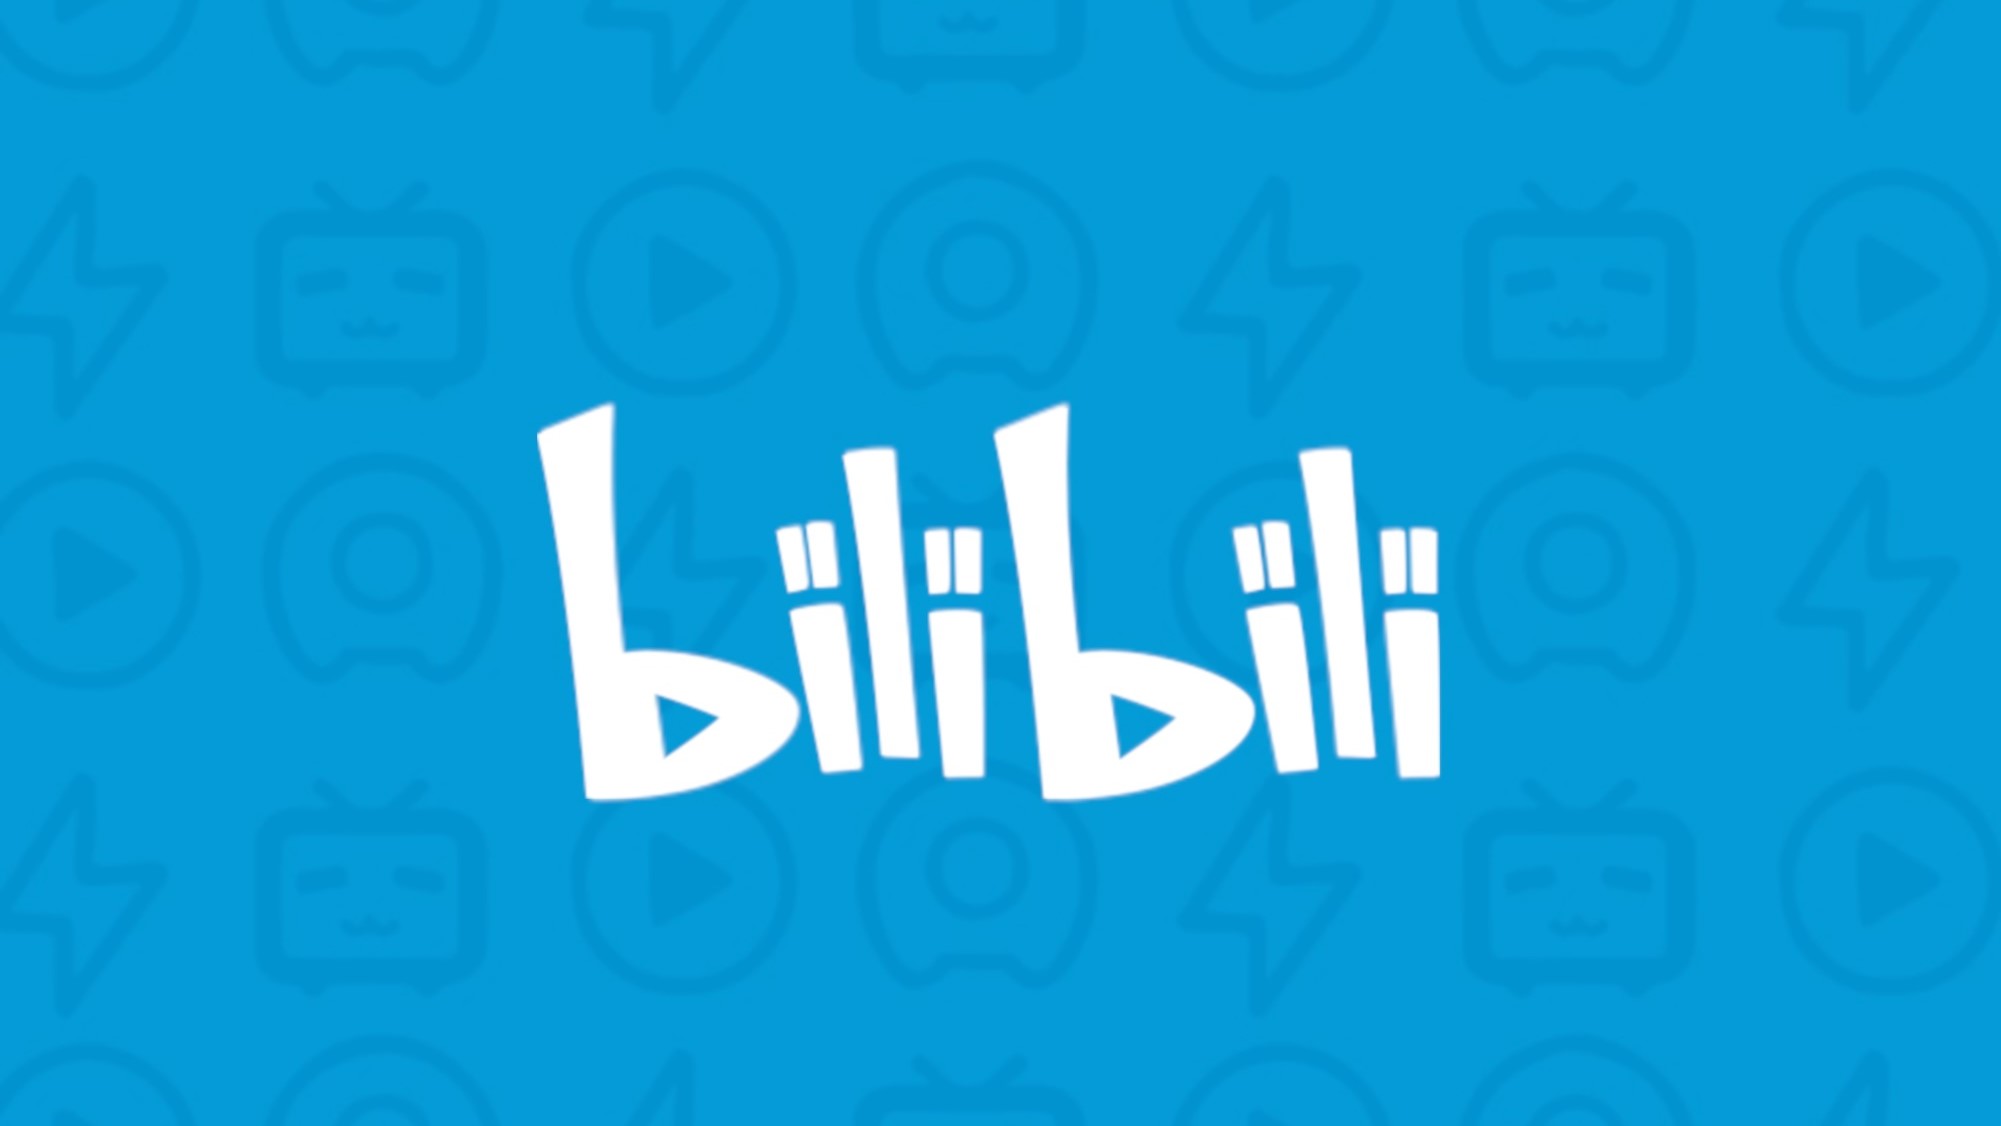 Bilibili, a Chinese anime/game video sharing website did their own